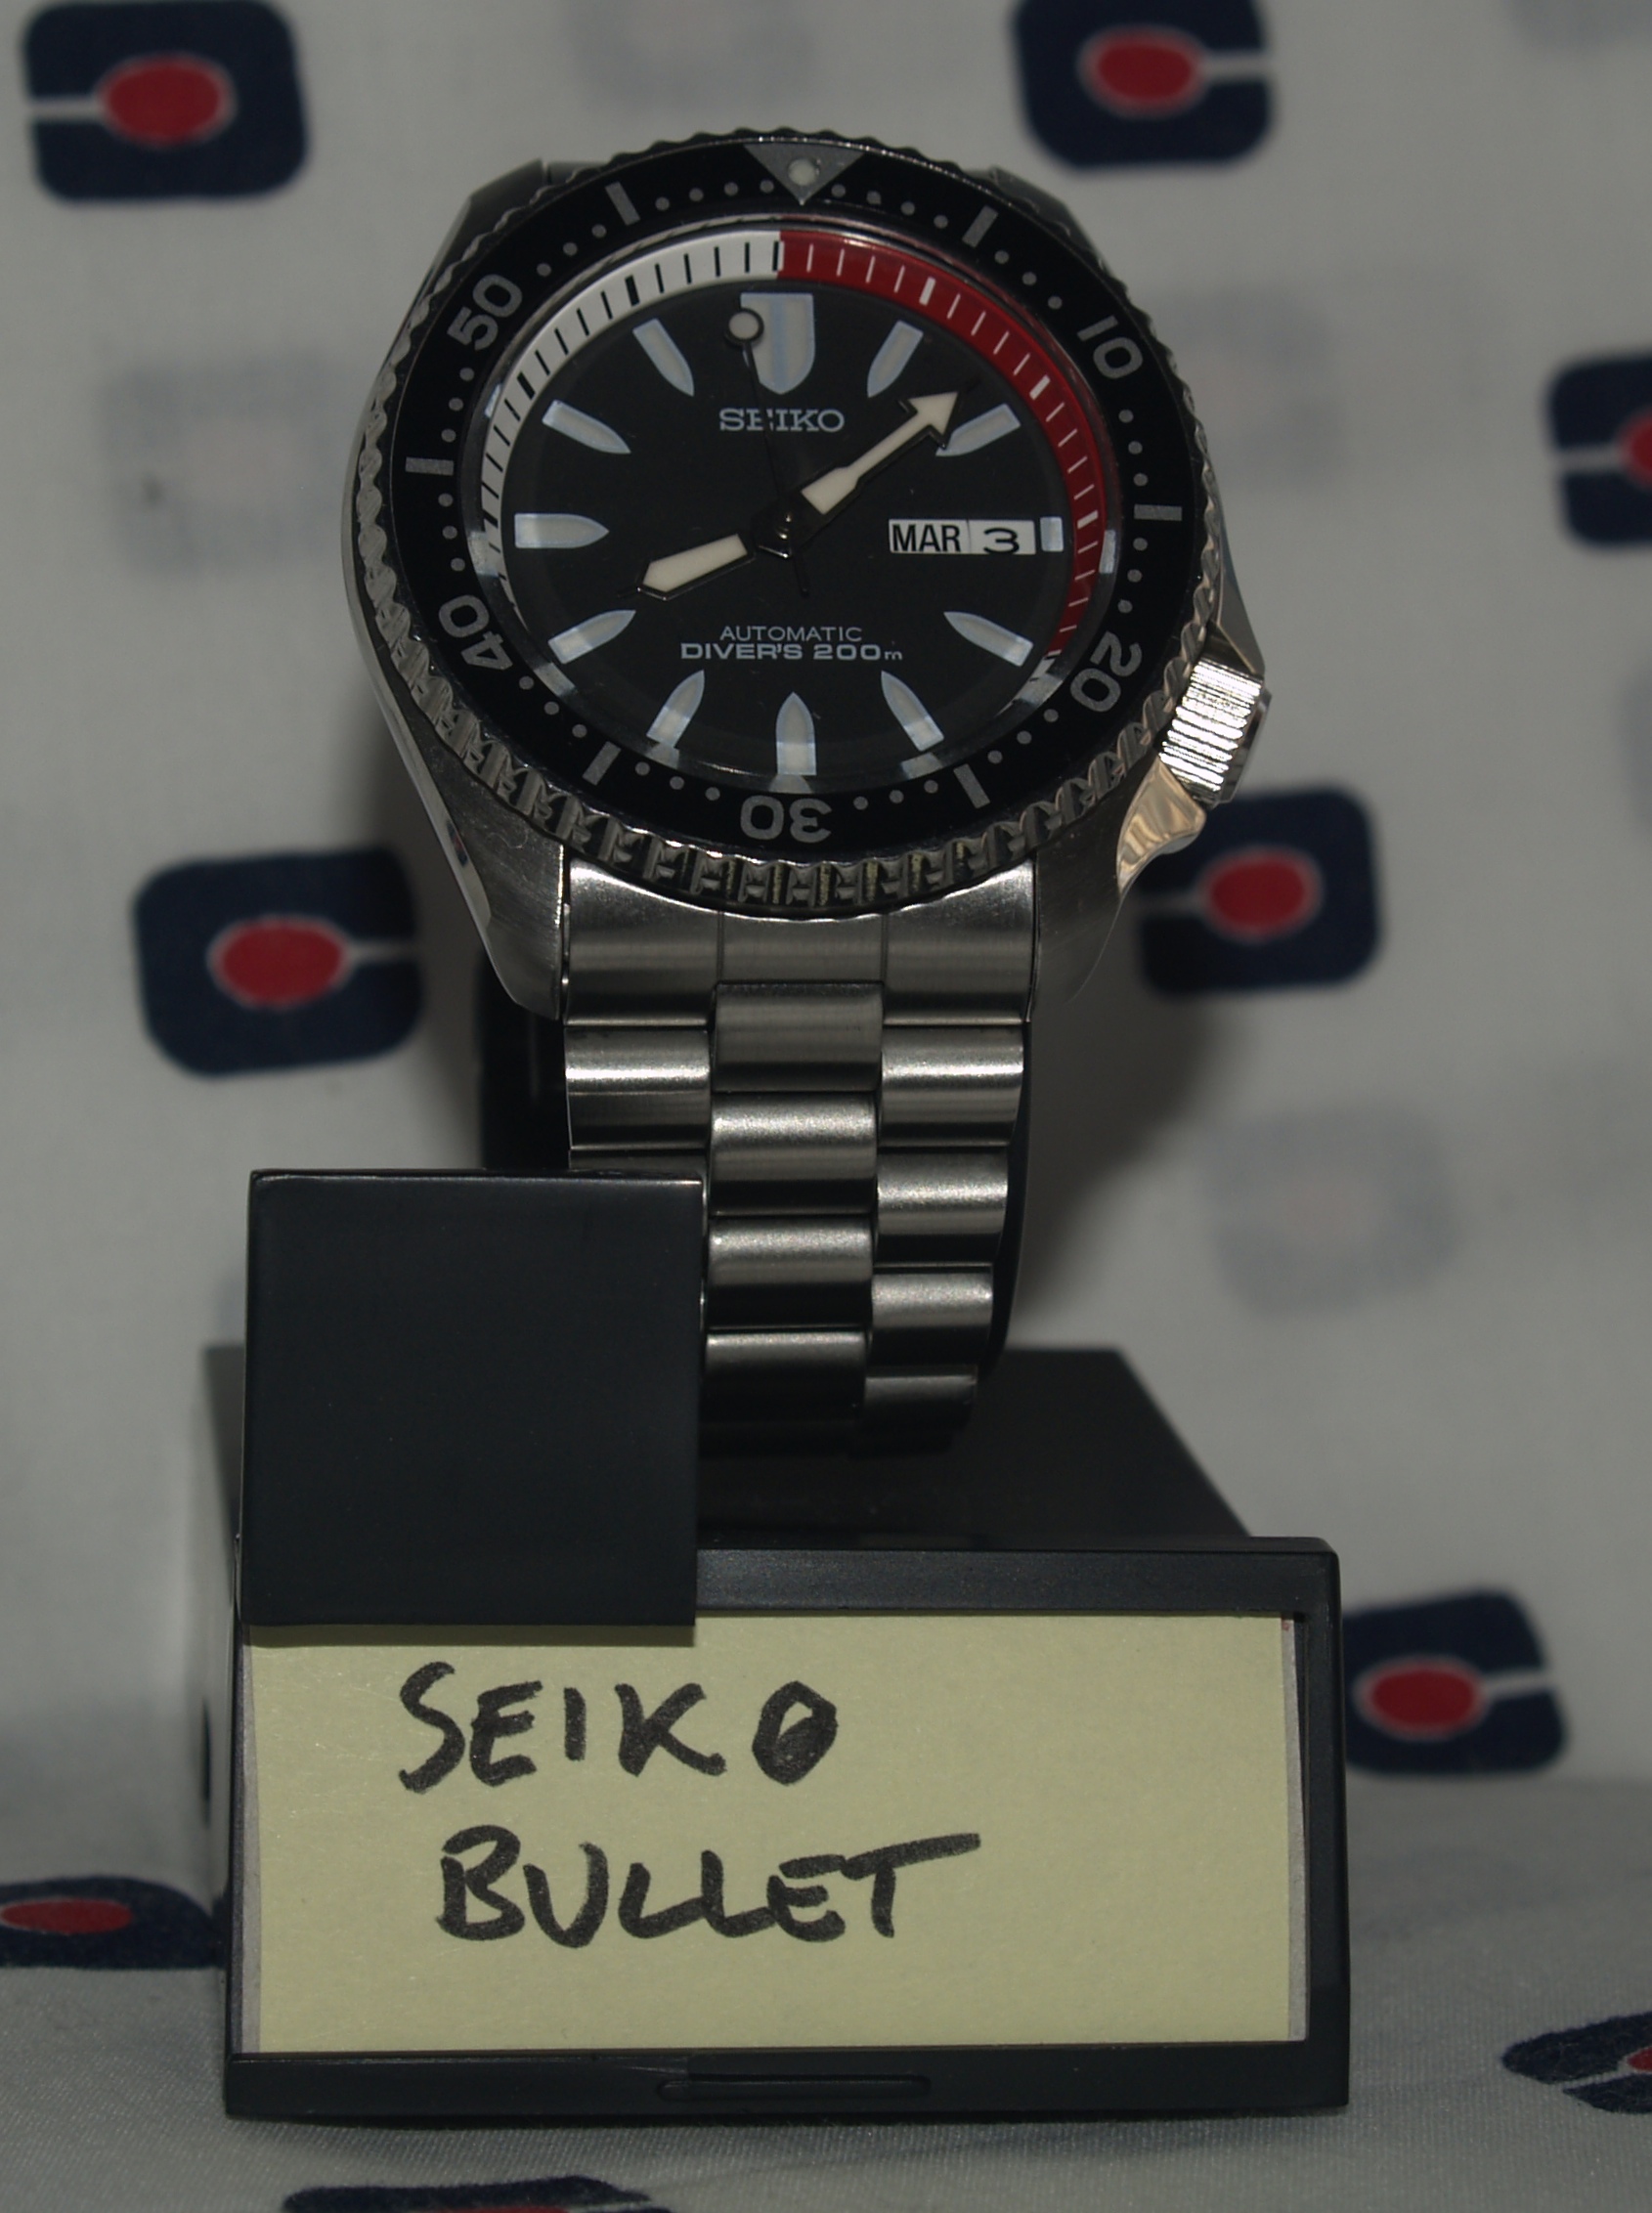 Review Seiko Bullet – Relojes Asequibles